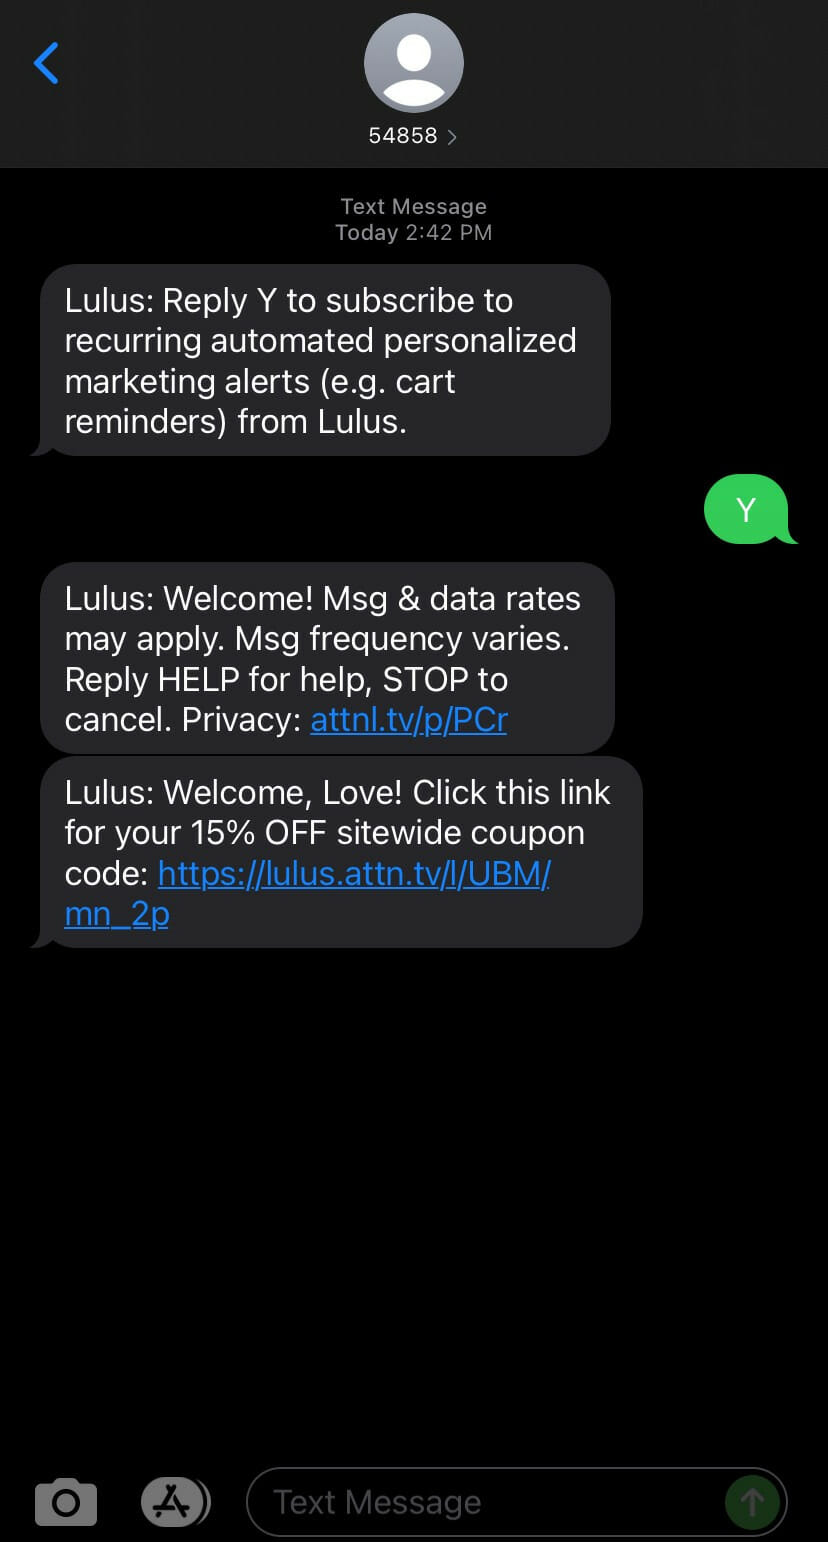 SMS text messages from lulu’s to confirm text message sign up